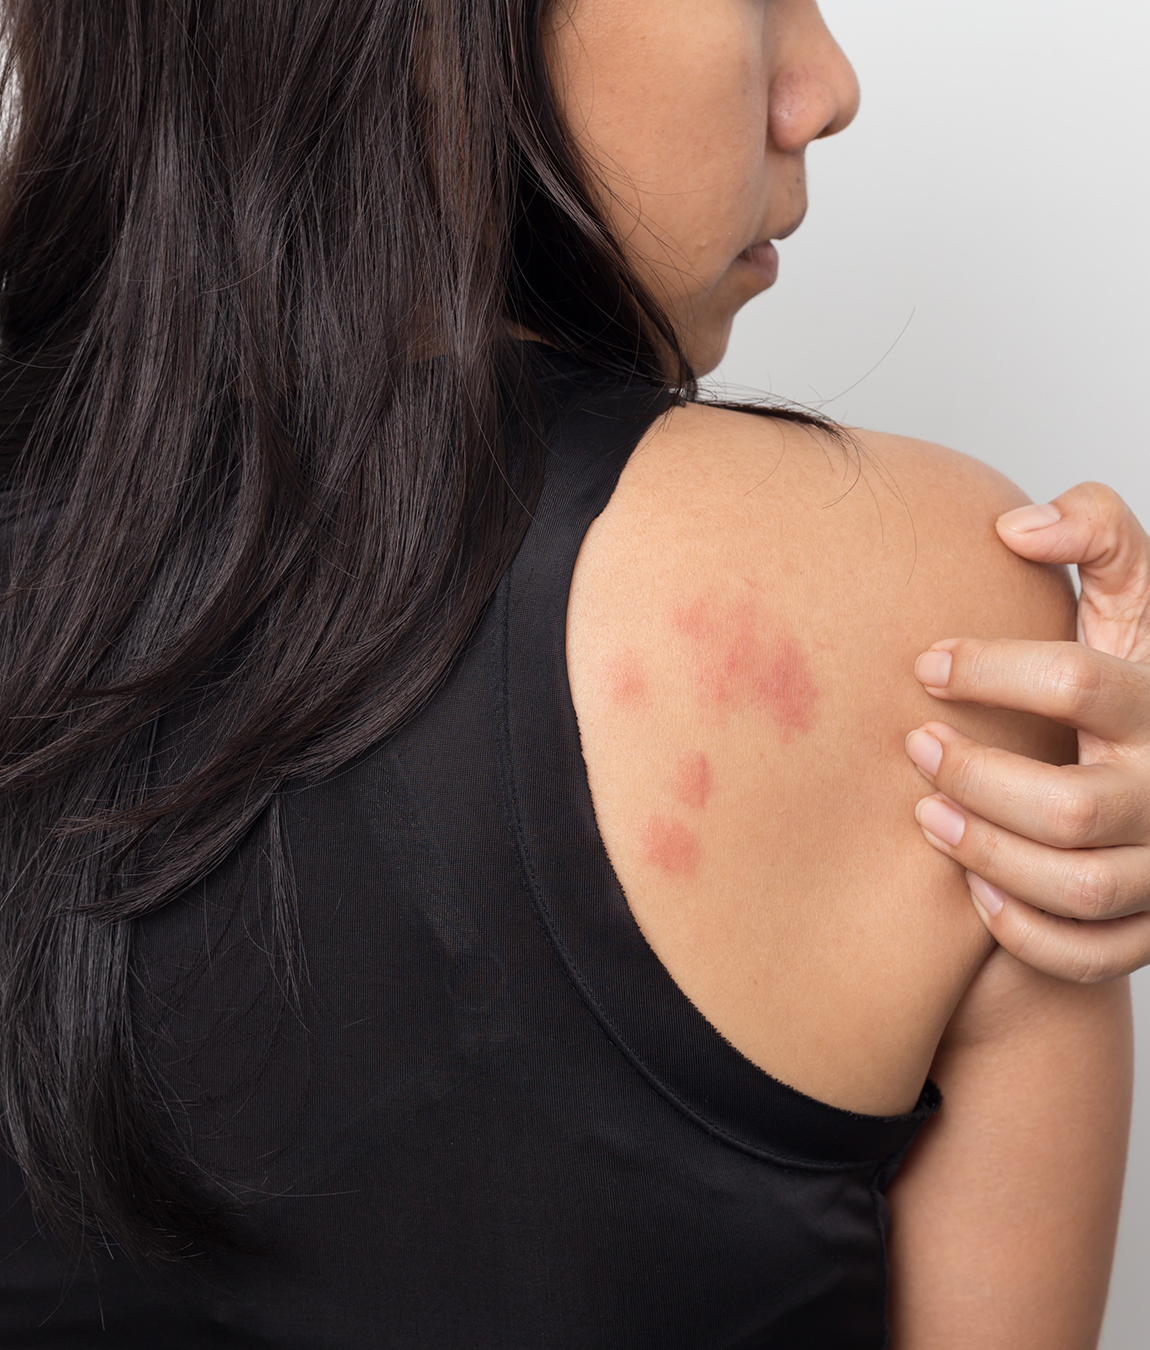 Rashes on a woman's back